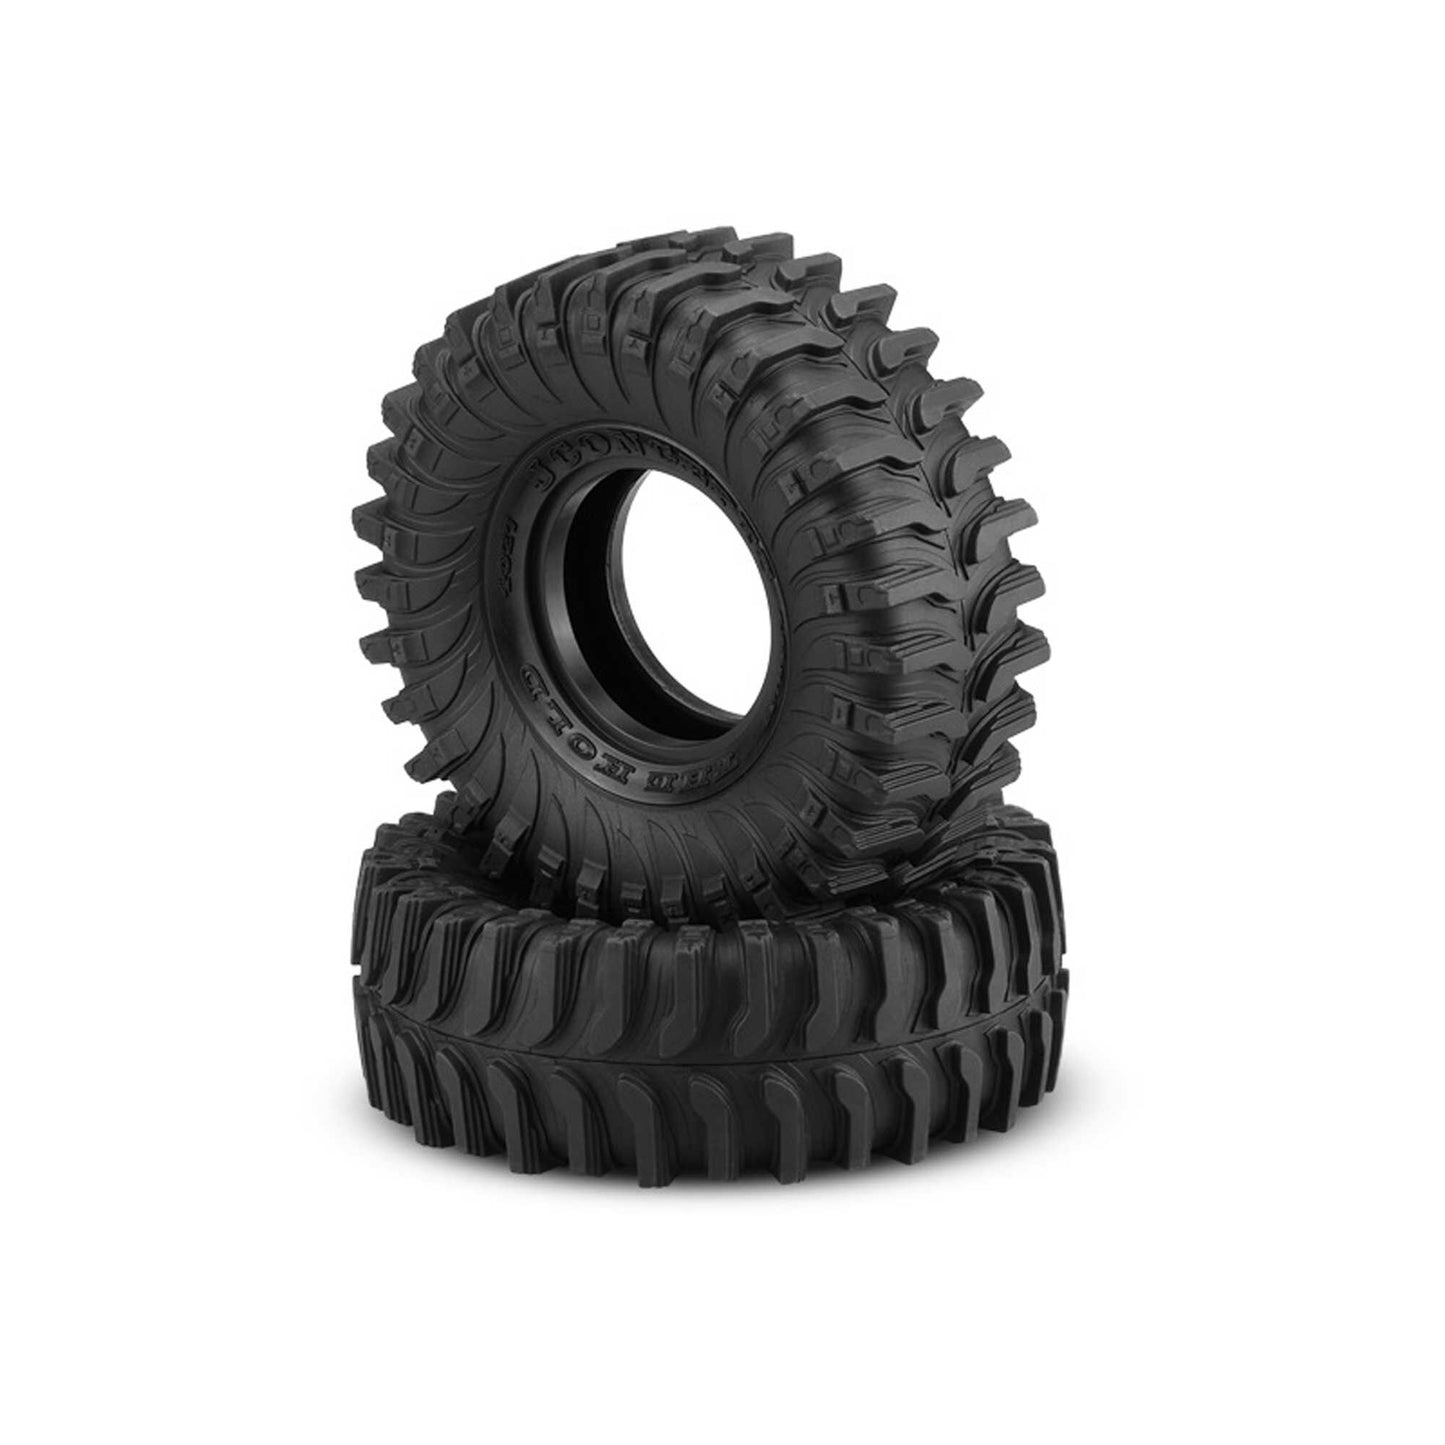 1/10 The Hold Performance Scaler 1.9” Crawler Tires with Inserts  Green Compound (2)